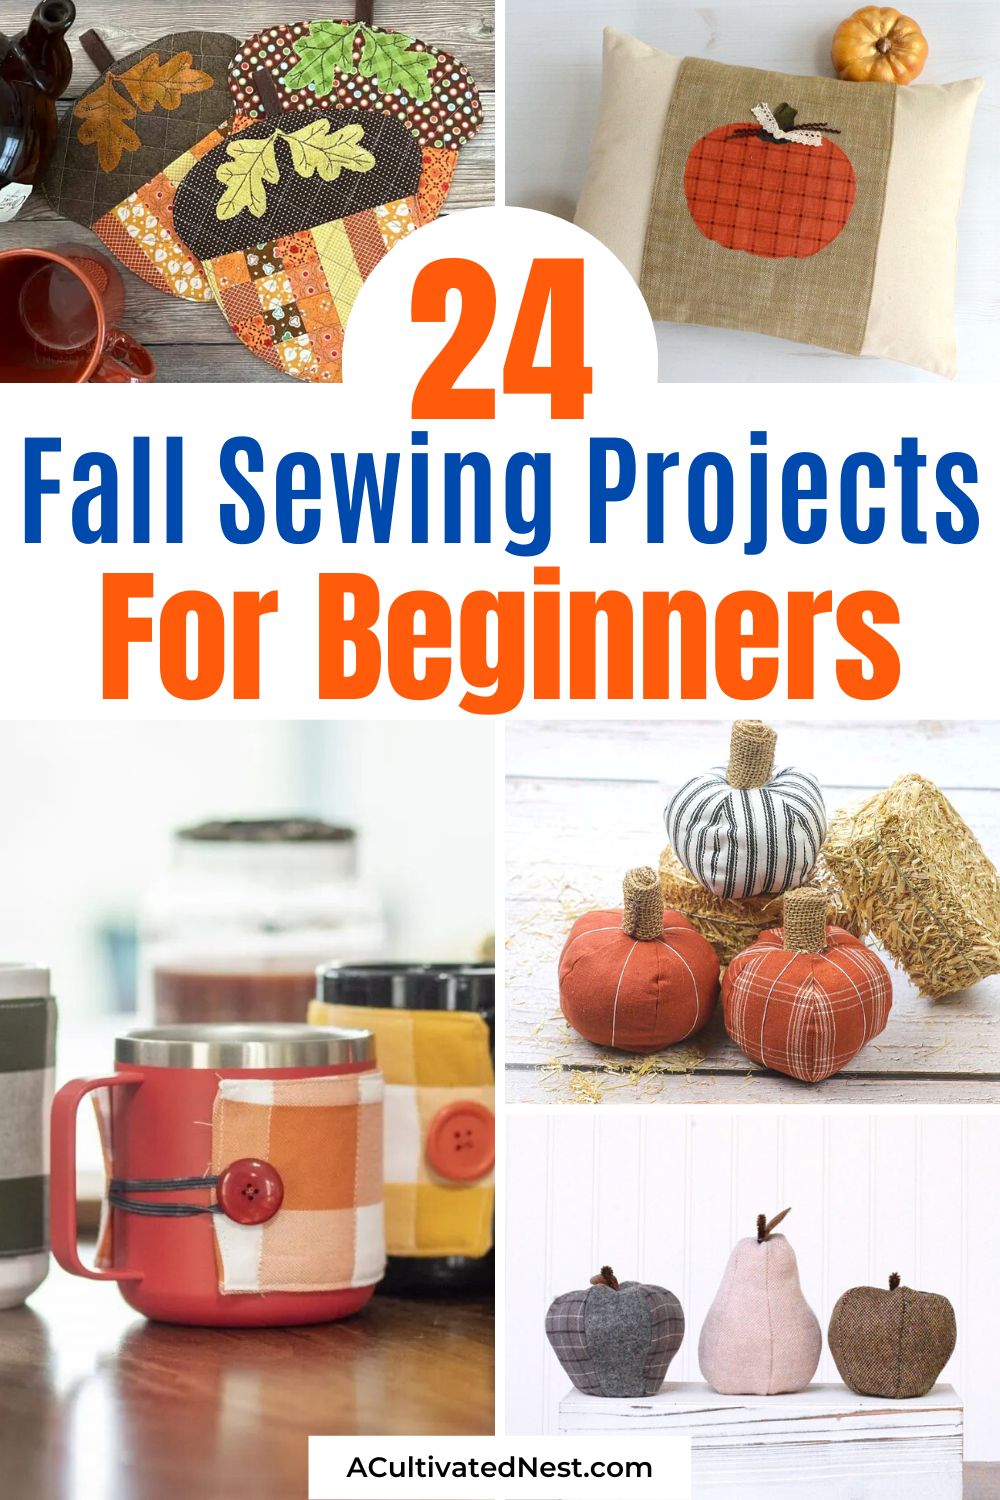 24 Fall Sewing Projects for Beginners- Want to make some pretty home décor or a lovely gift on a budget this fall? Then you'll love these easy fall sewing projects for beginners! | fall DIY projects, fall crafts, #sewing #fallCrafts #beginnerSewingProjects #fallDIY #ACultivatedNest